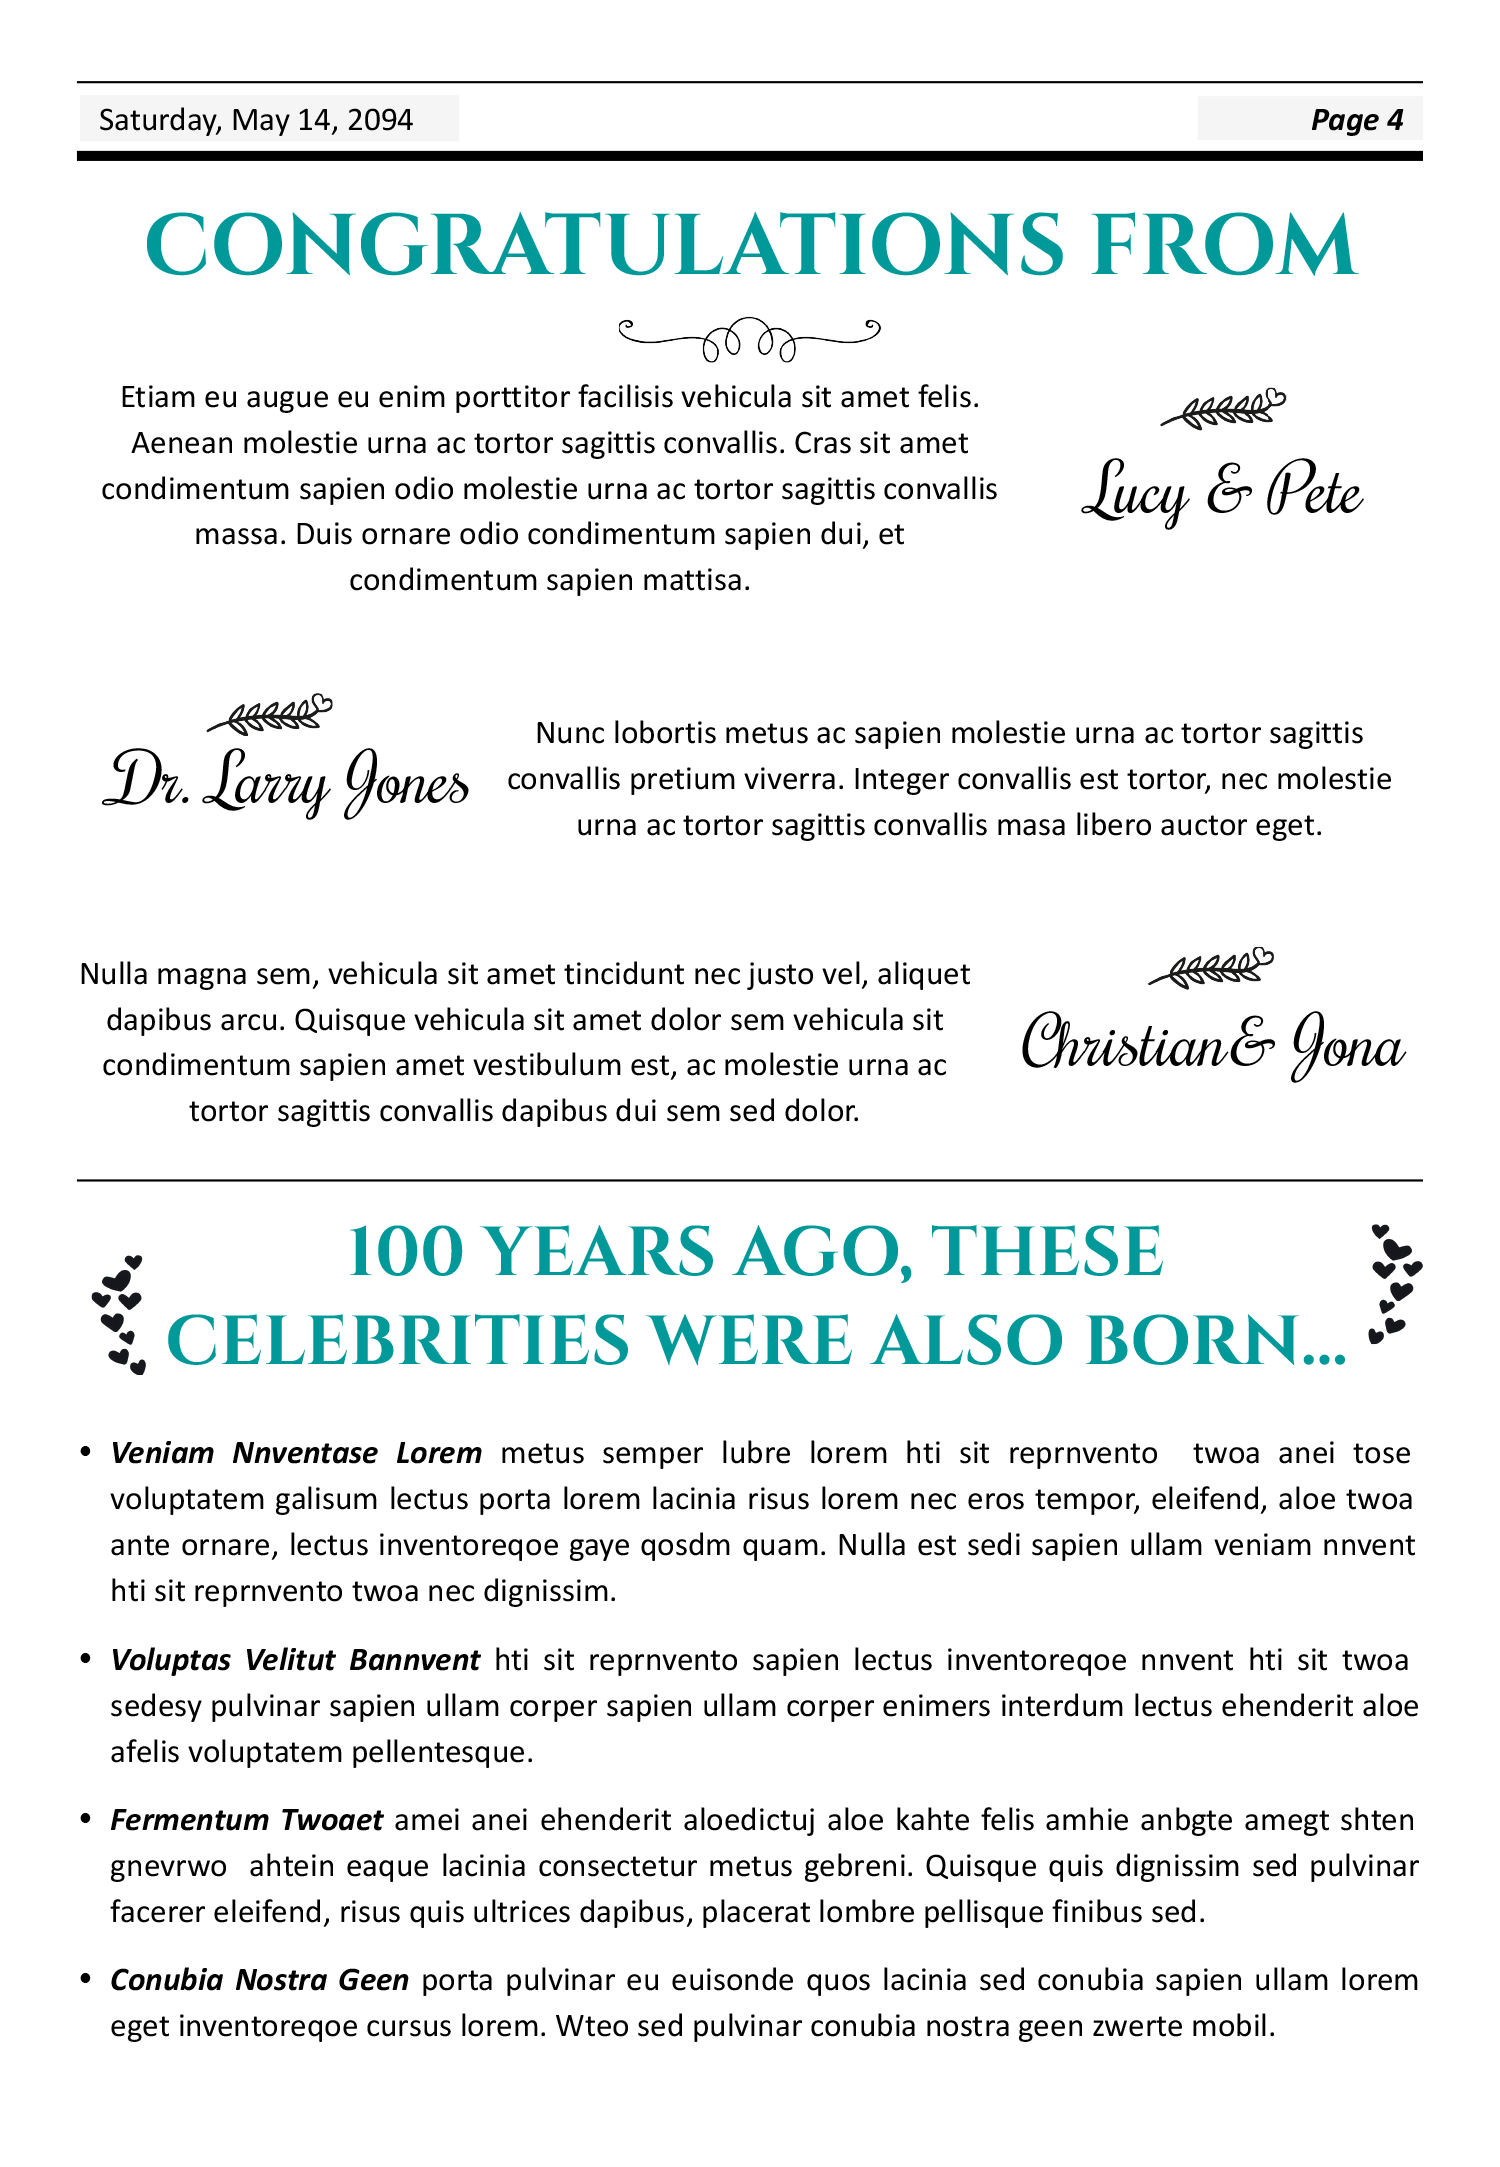 100th Birthday Newspaper Template - Page 04